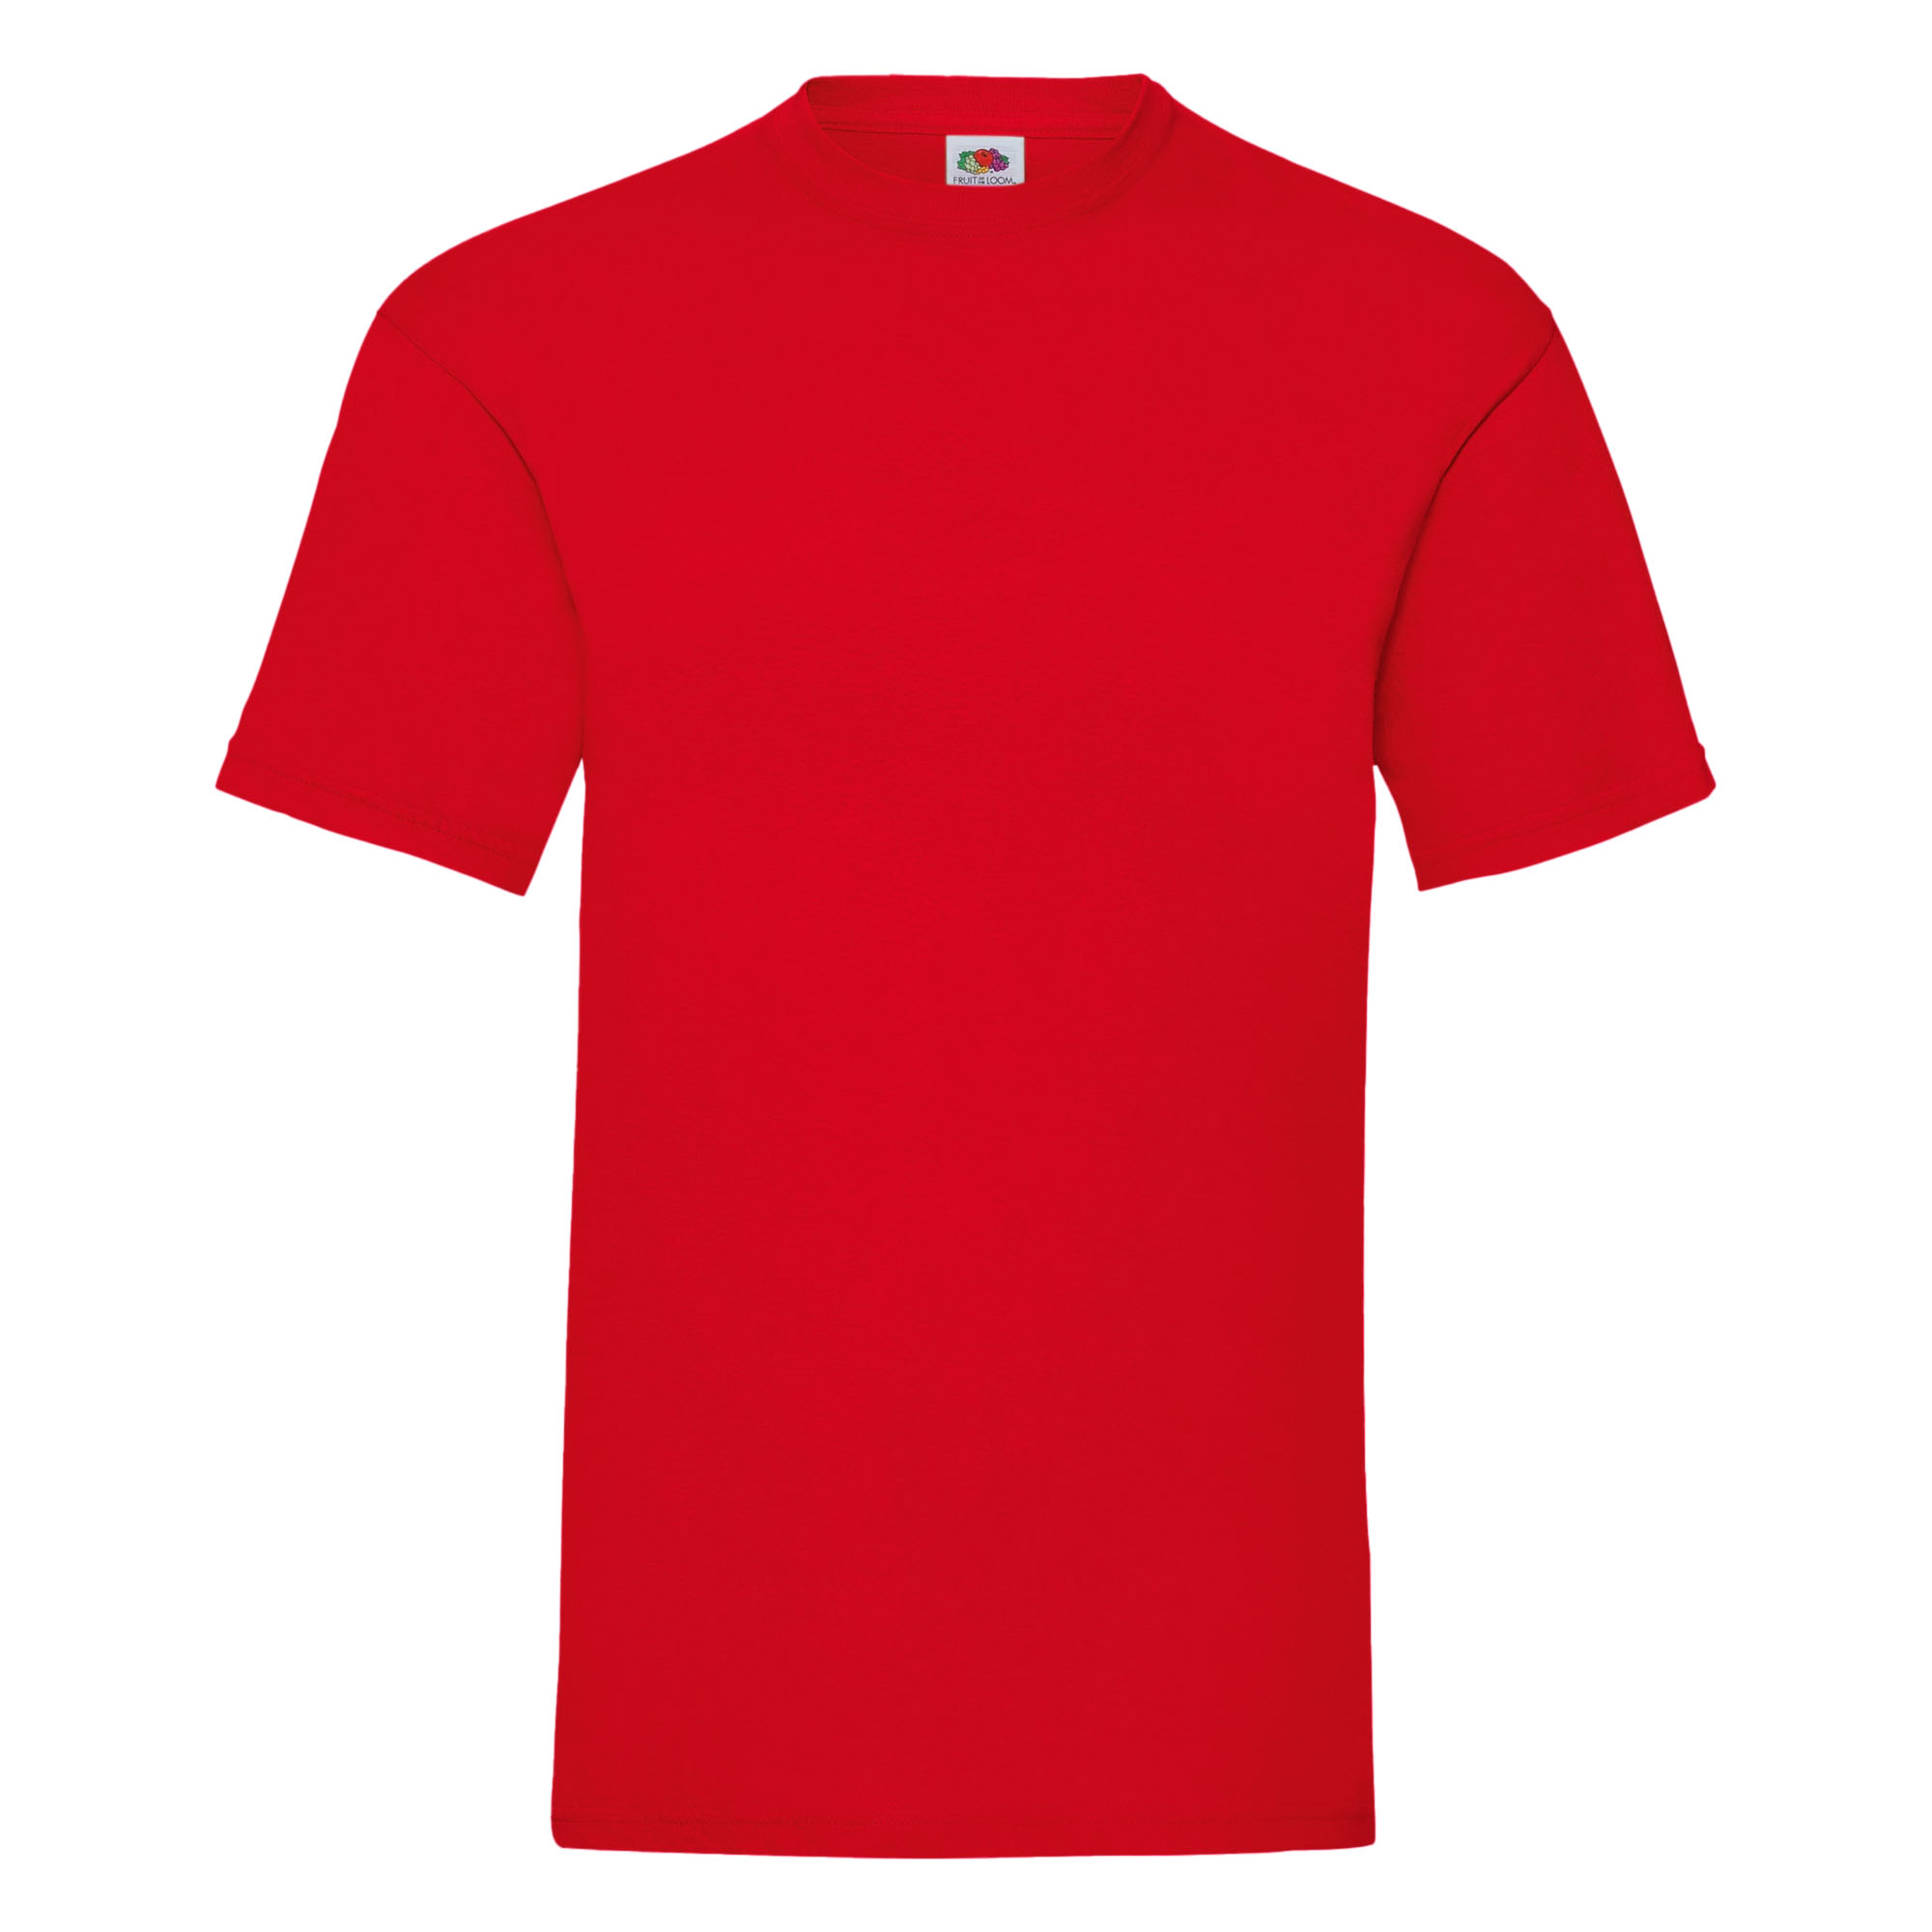 T-shirt Fruit Of The Loom Valueweight - rojo - 